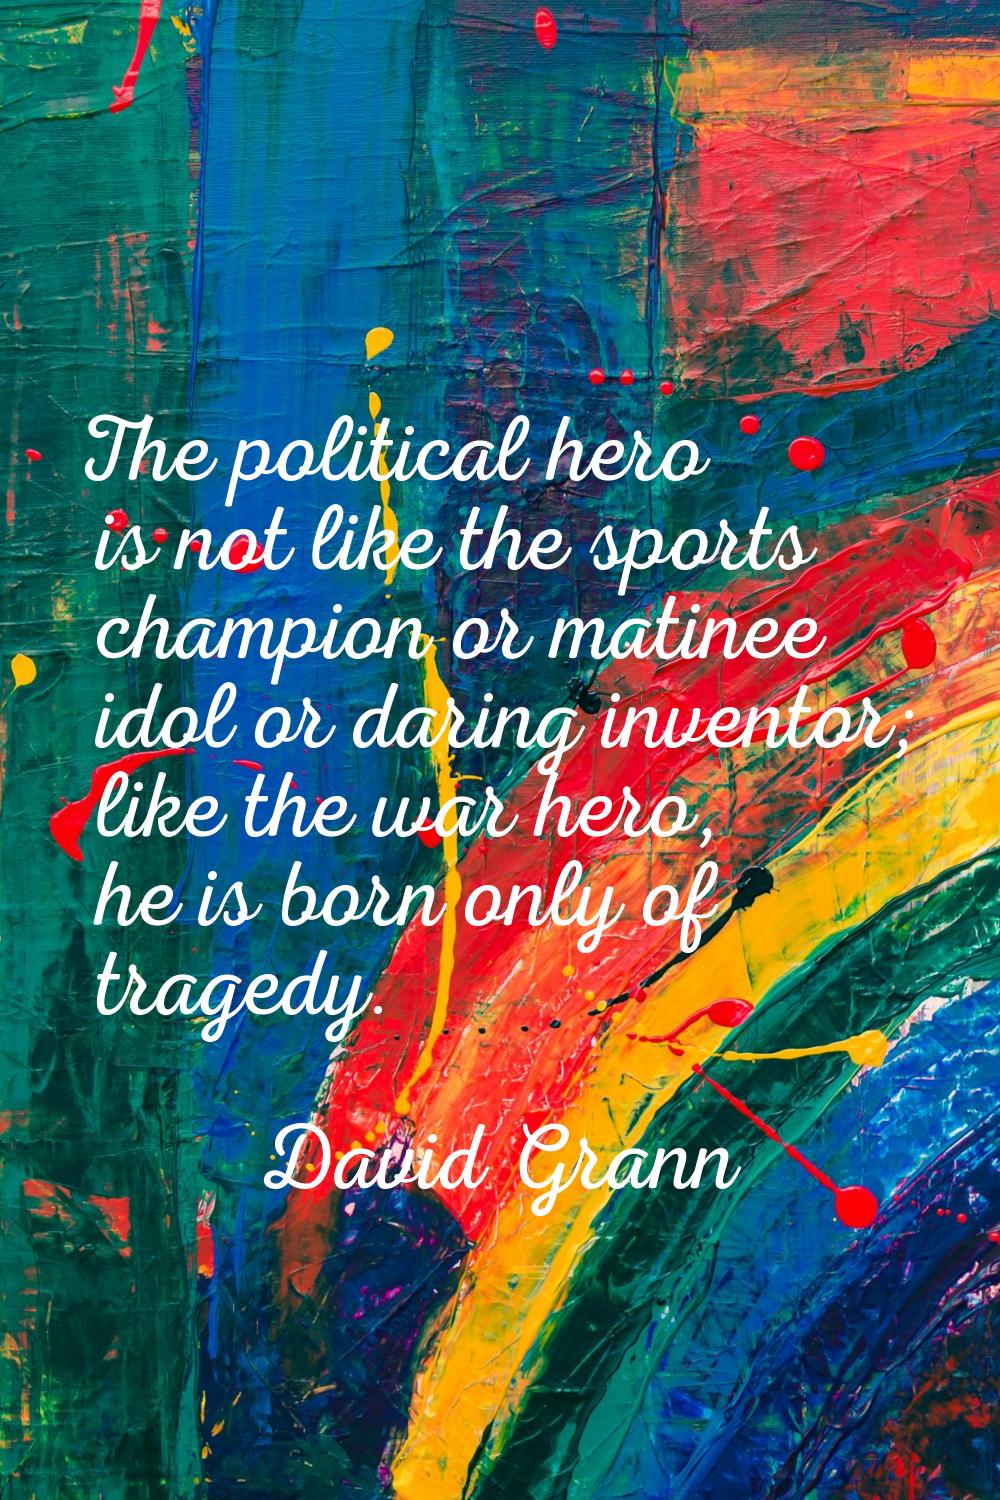 The political hero is not like the sports champion or matinee idol or daring inventor; like the war